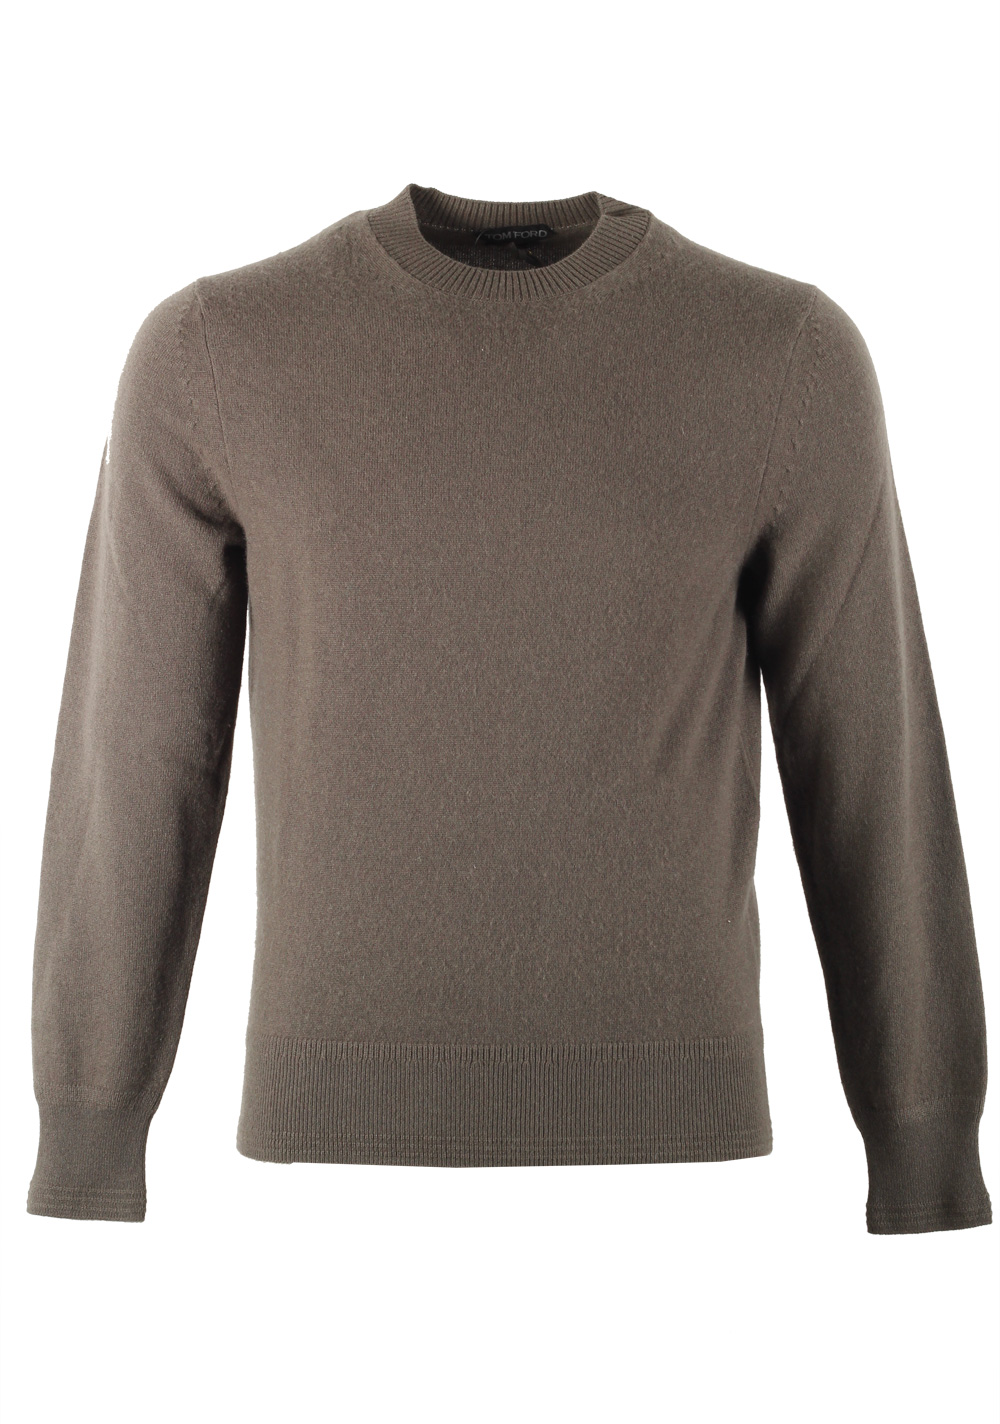 TOM FORD Brownish Green Crew Neck Sweater Size 48 / 38R U.S. In Cashmere | Costume Limité